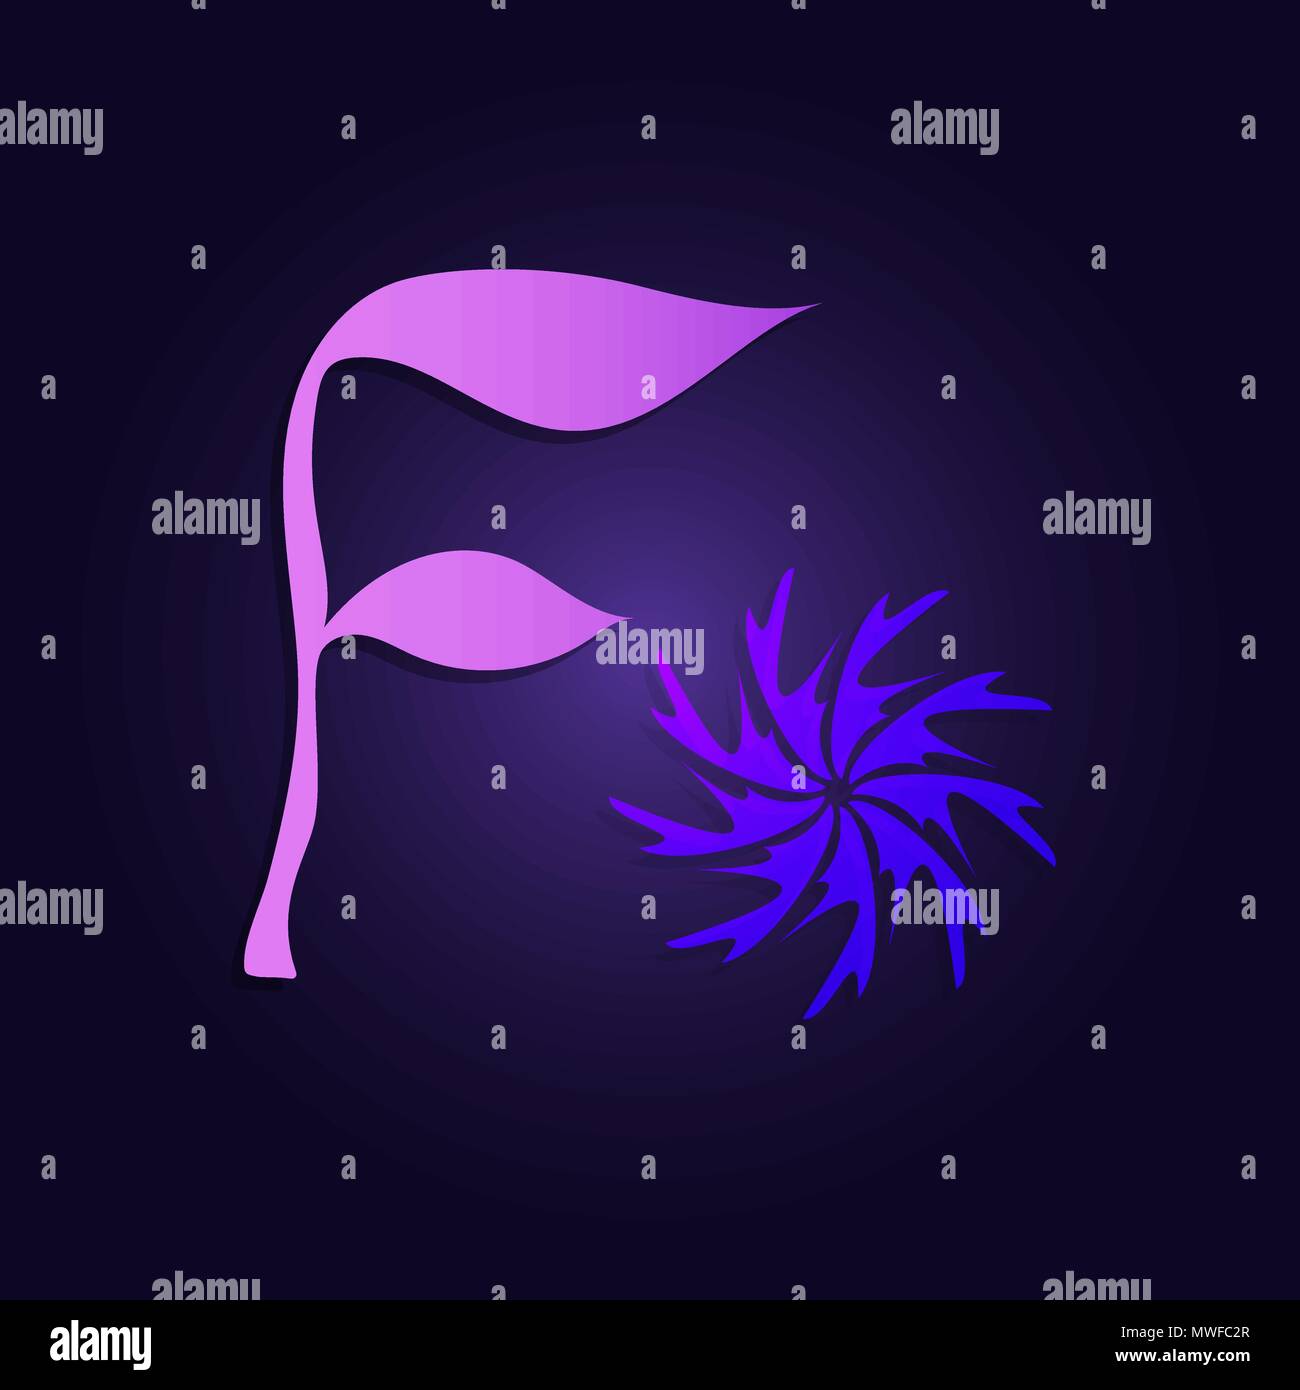 Letter f logotype design in shape of branch with leafs and abstract flower symbol glowing in ultraviolet Stock Vector